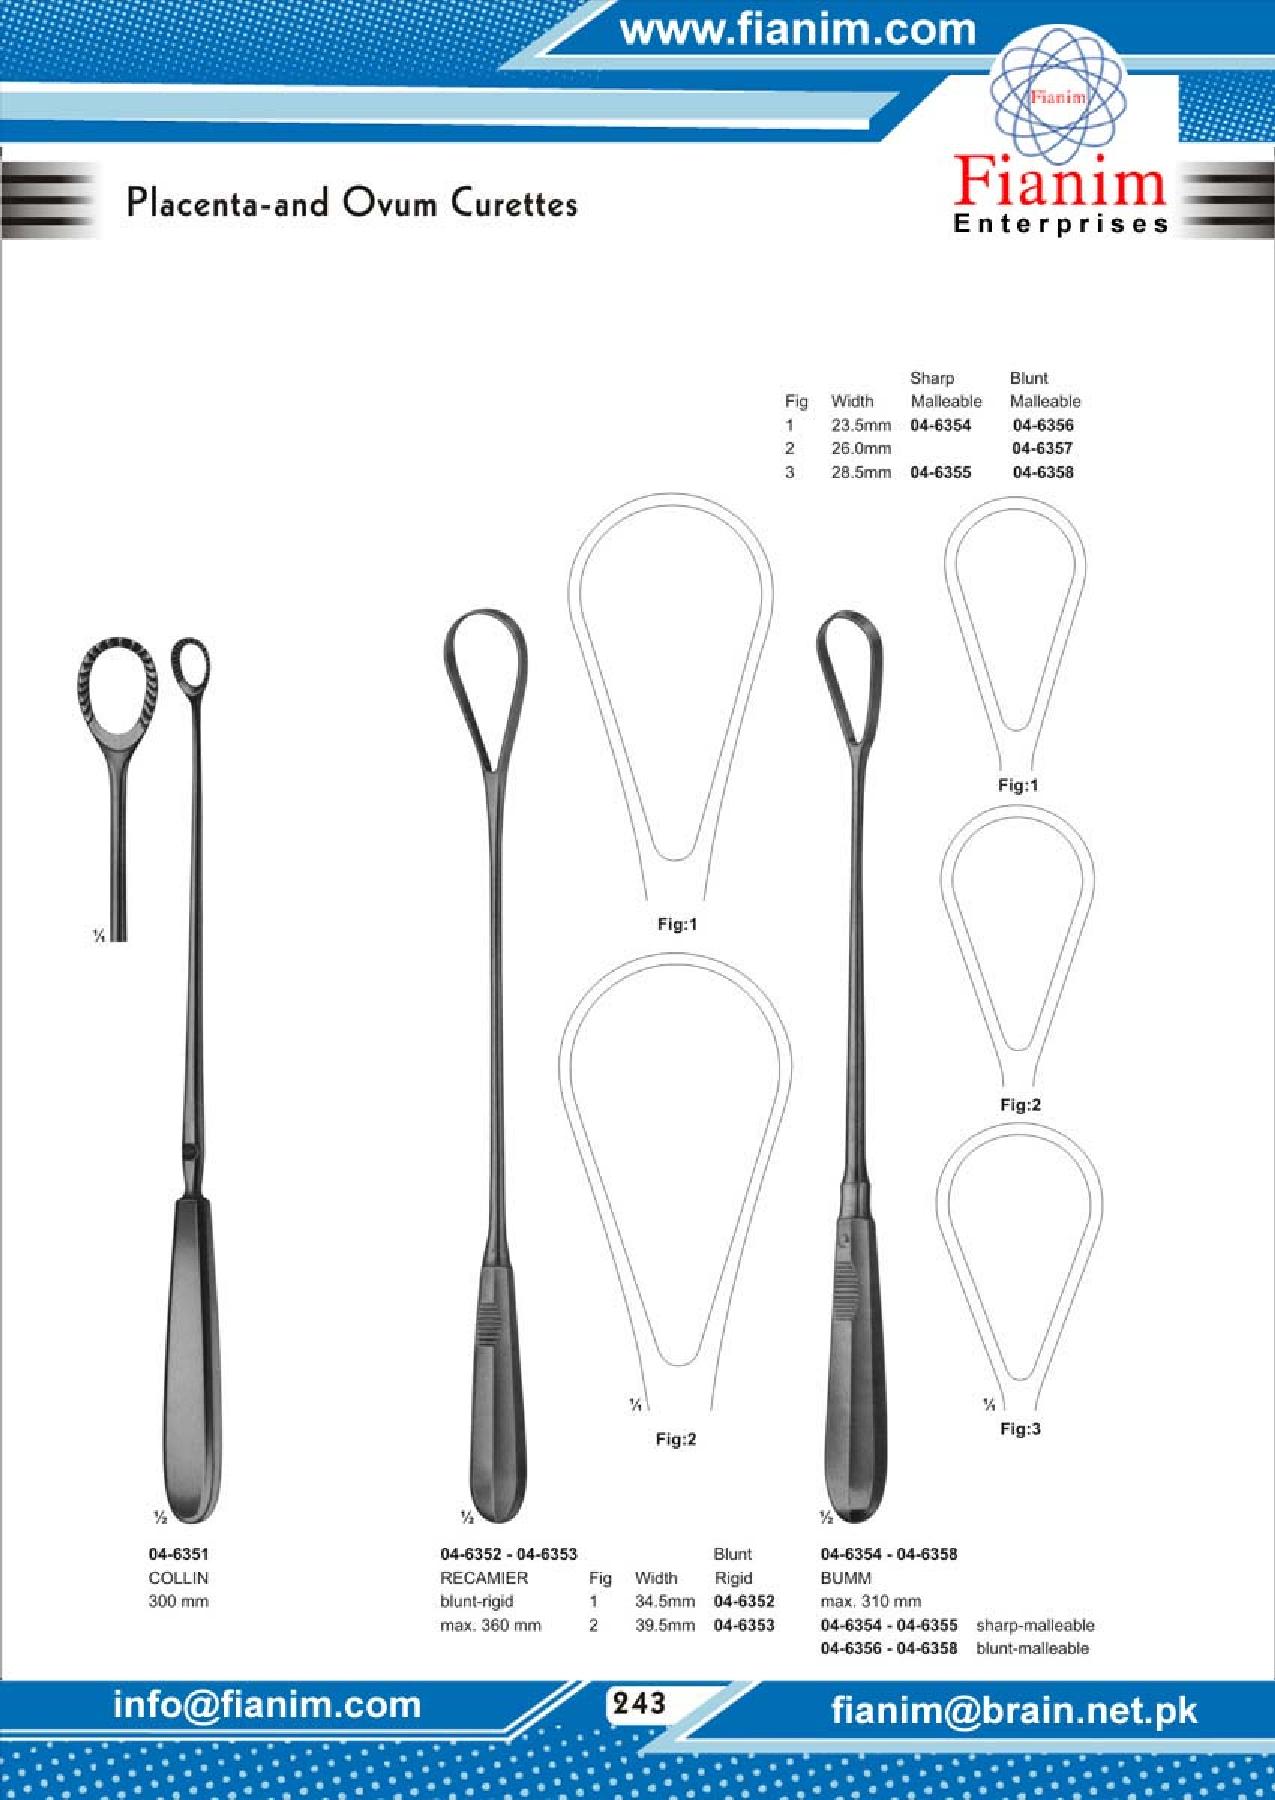 Biopsy Instruments Utrine Curettes / Scoops